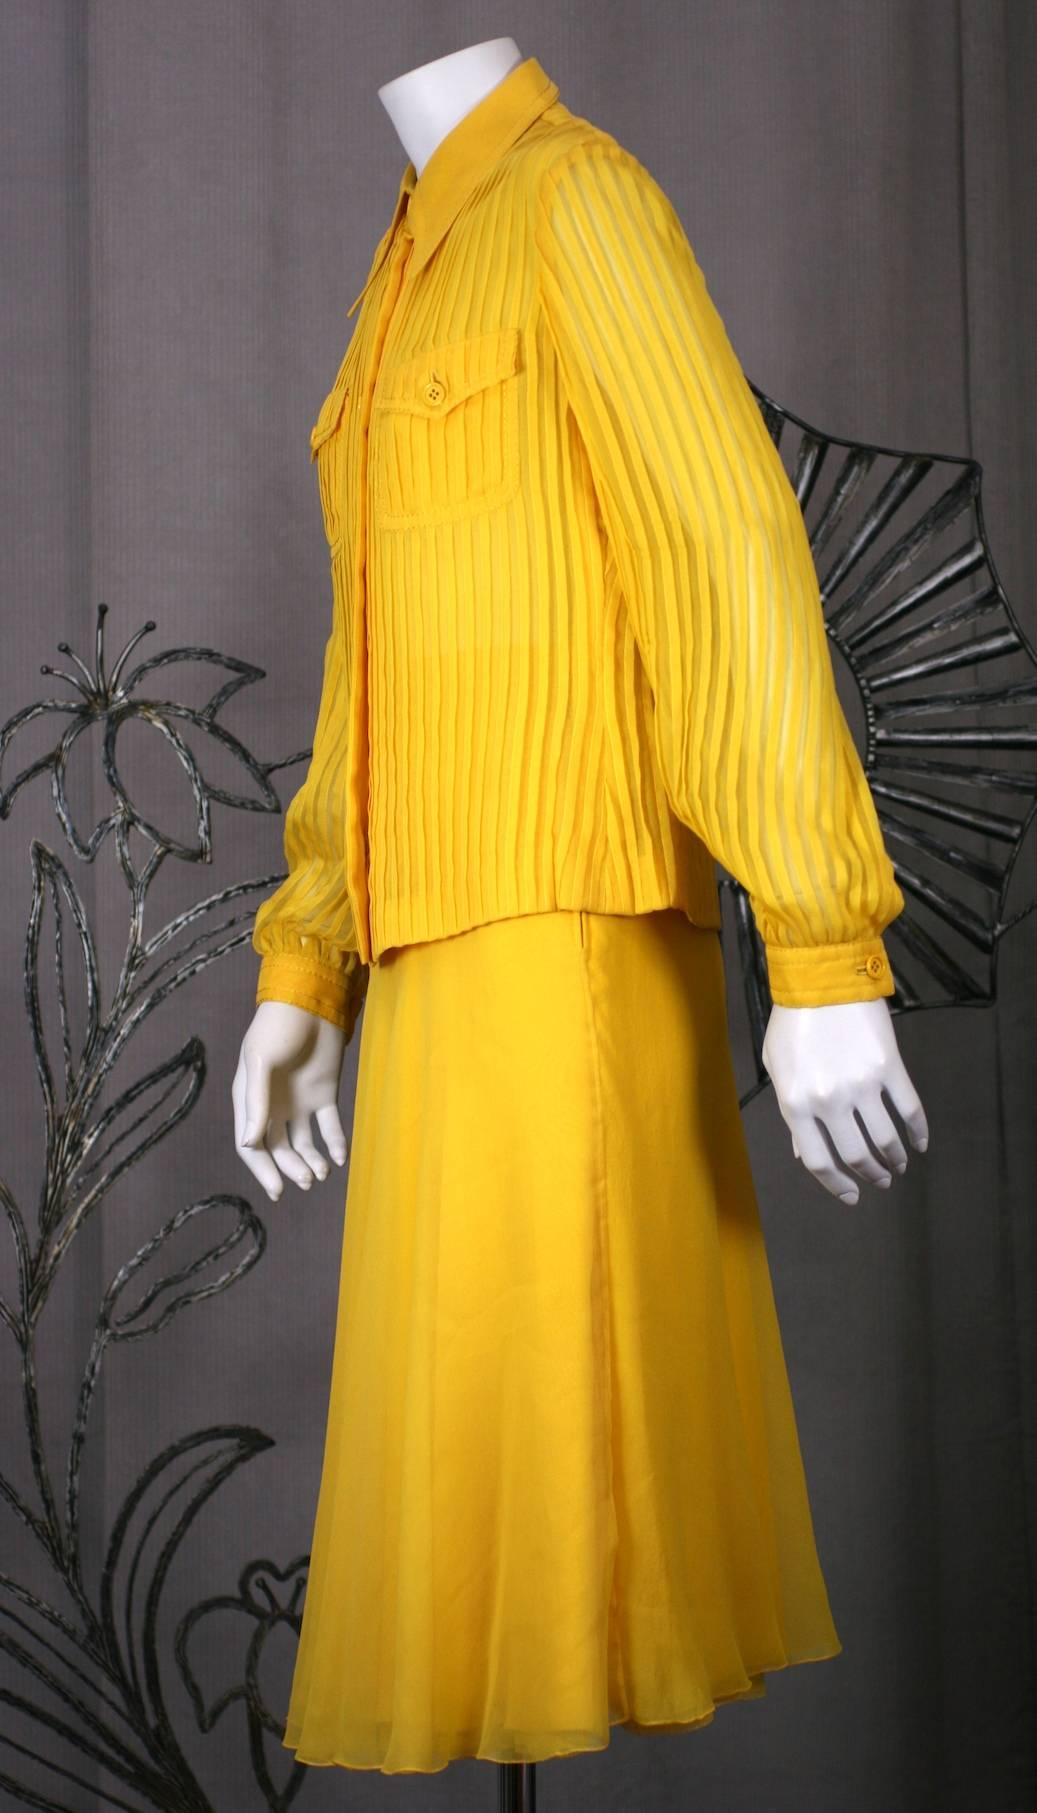 Galanos Charming Chrome Yellow Chiffon Skirt Ensemble In Excellent Condition For Sale In New York, NY